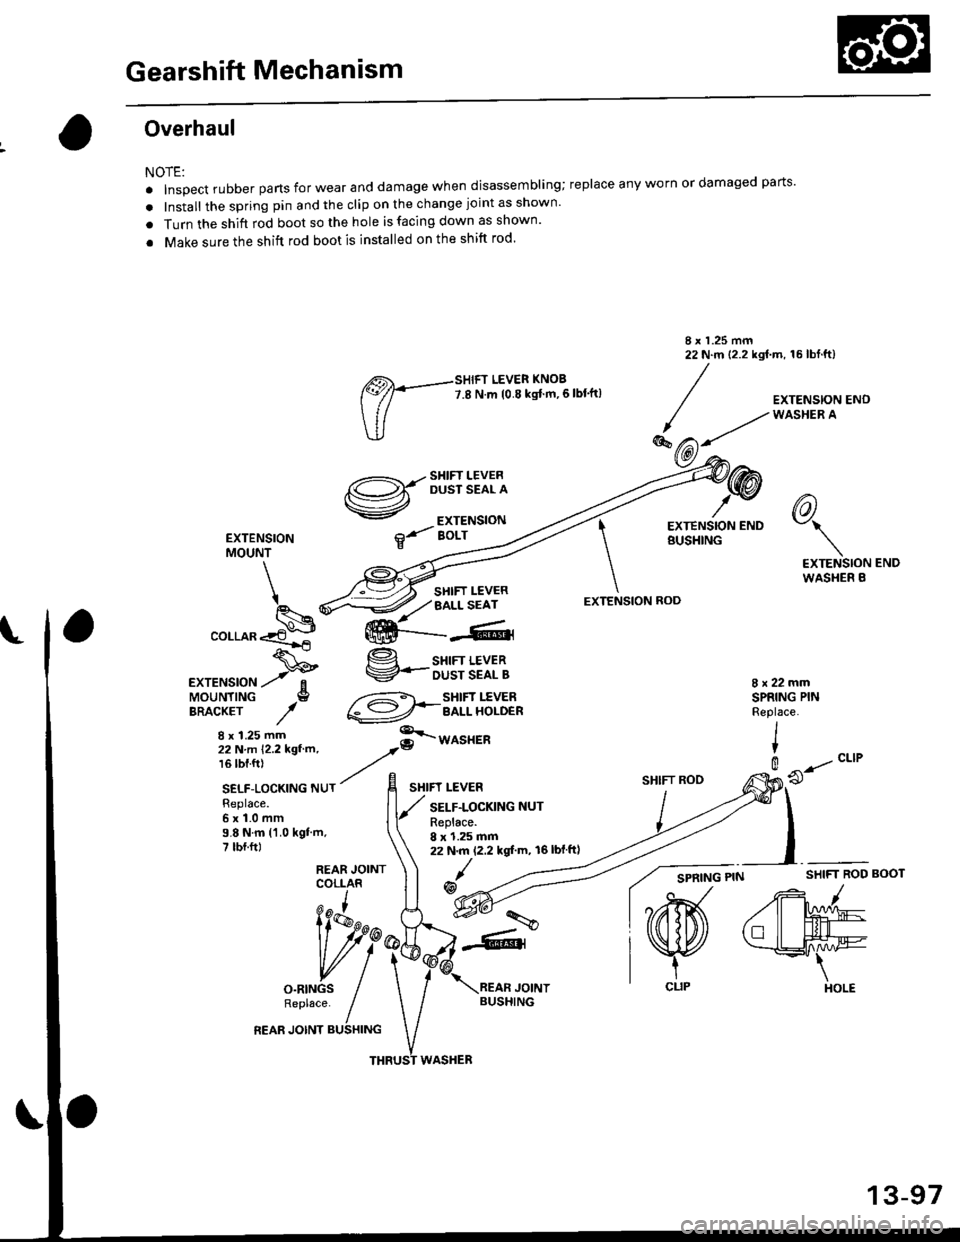 HONDA CIVIC 1997 6.G Workshop Manual Gearshift Mechanism
Overhaul
NOTE:
. Inspect rubber parts for wear and damage when disassembling;
. Install the spring pin and the clip on the change joint as shown
. Turn the shift rod boot so the h